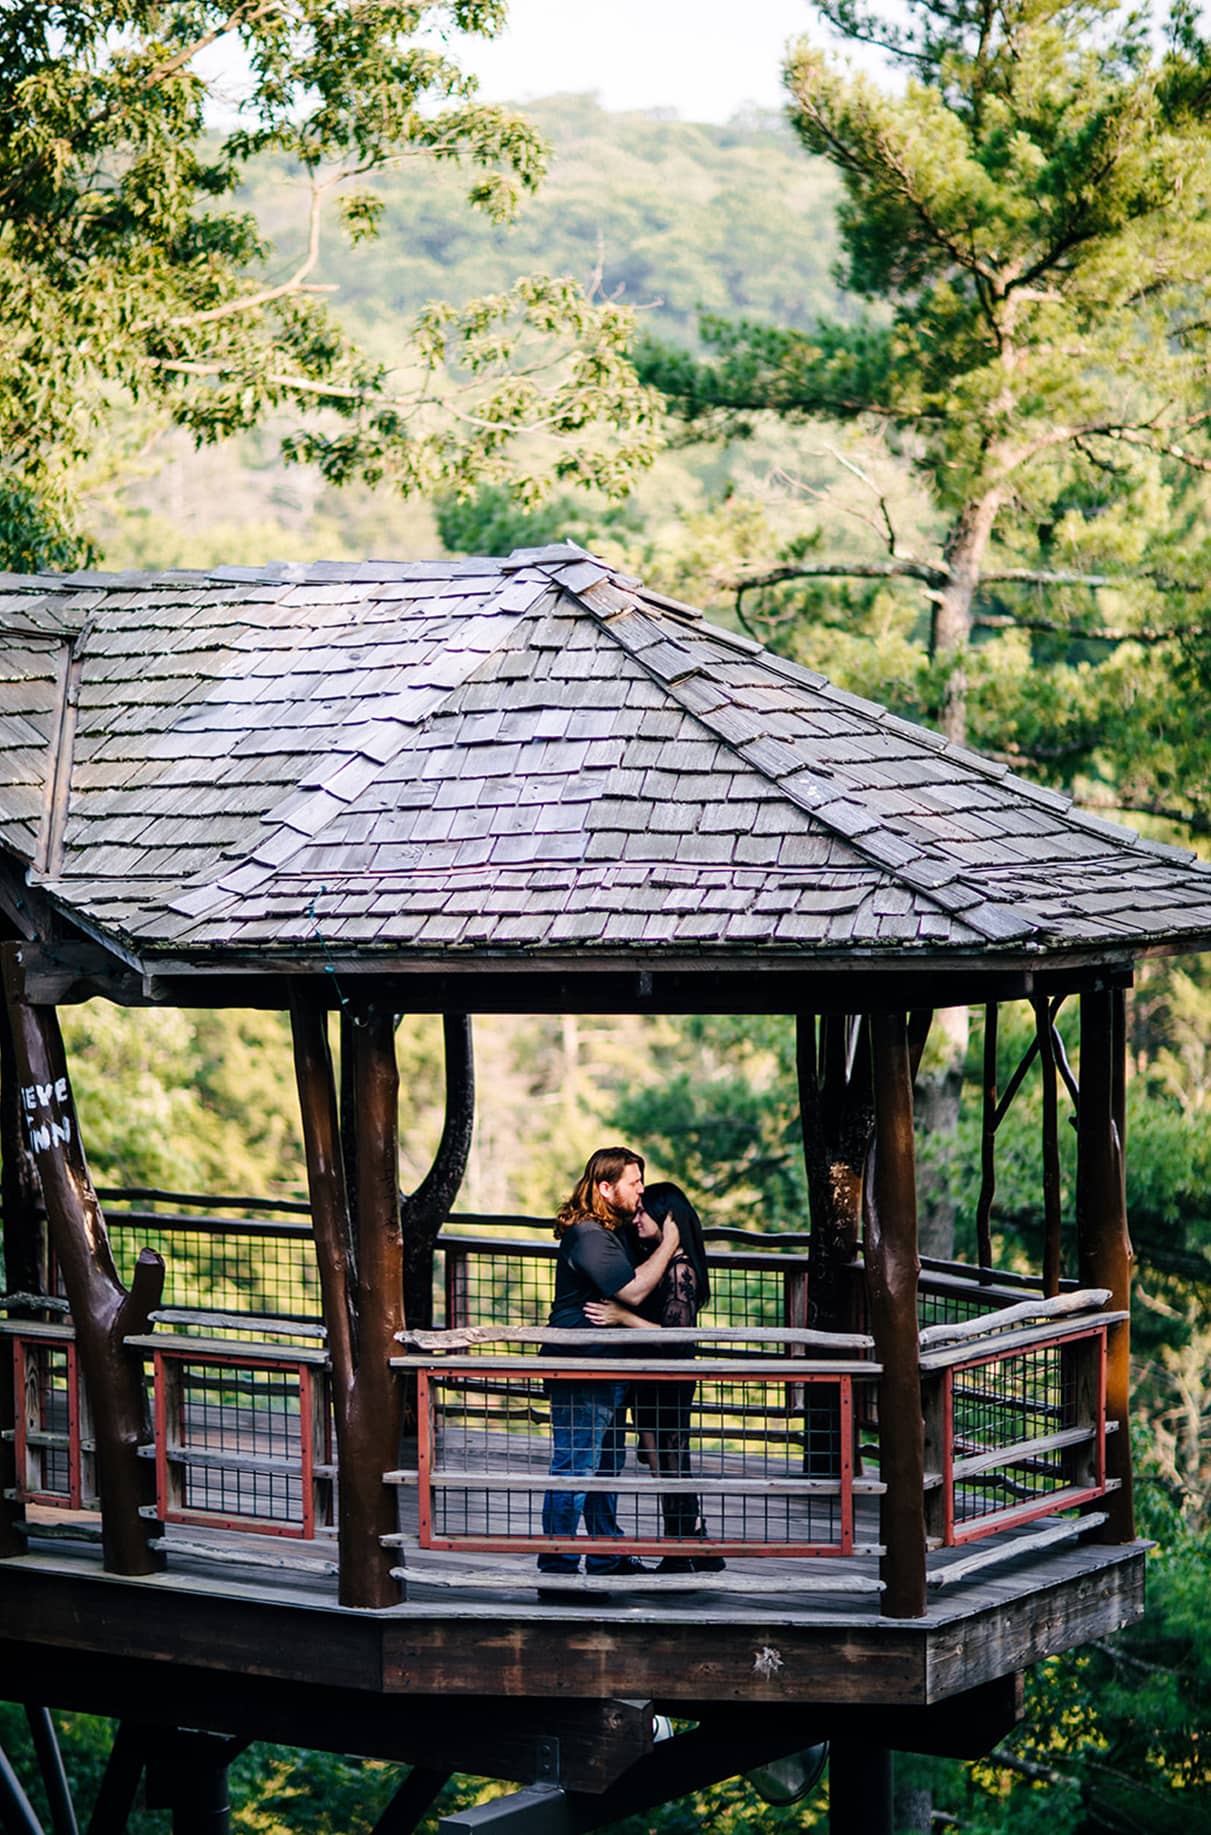 Man kisses womans forehead in David Wenzel Treehouse Nay Aug Park Scranton PA